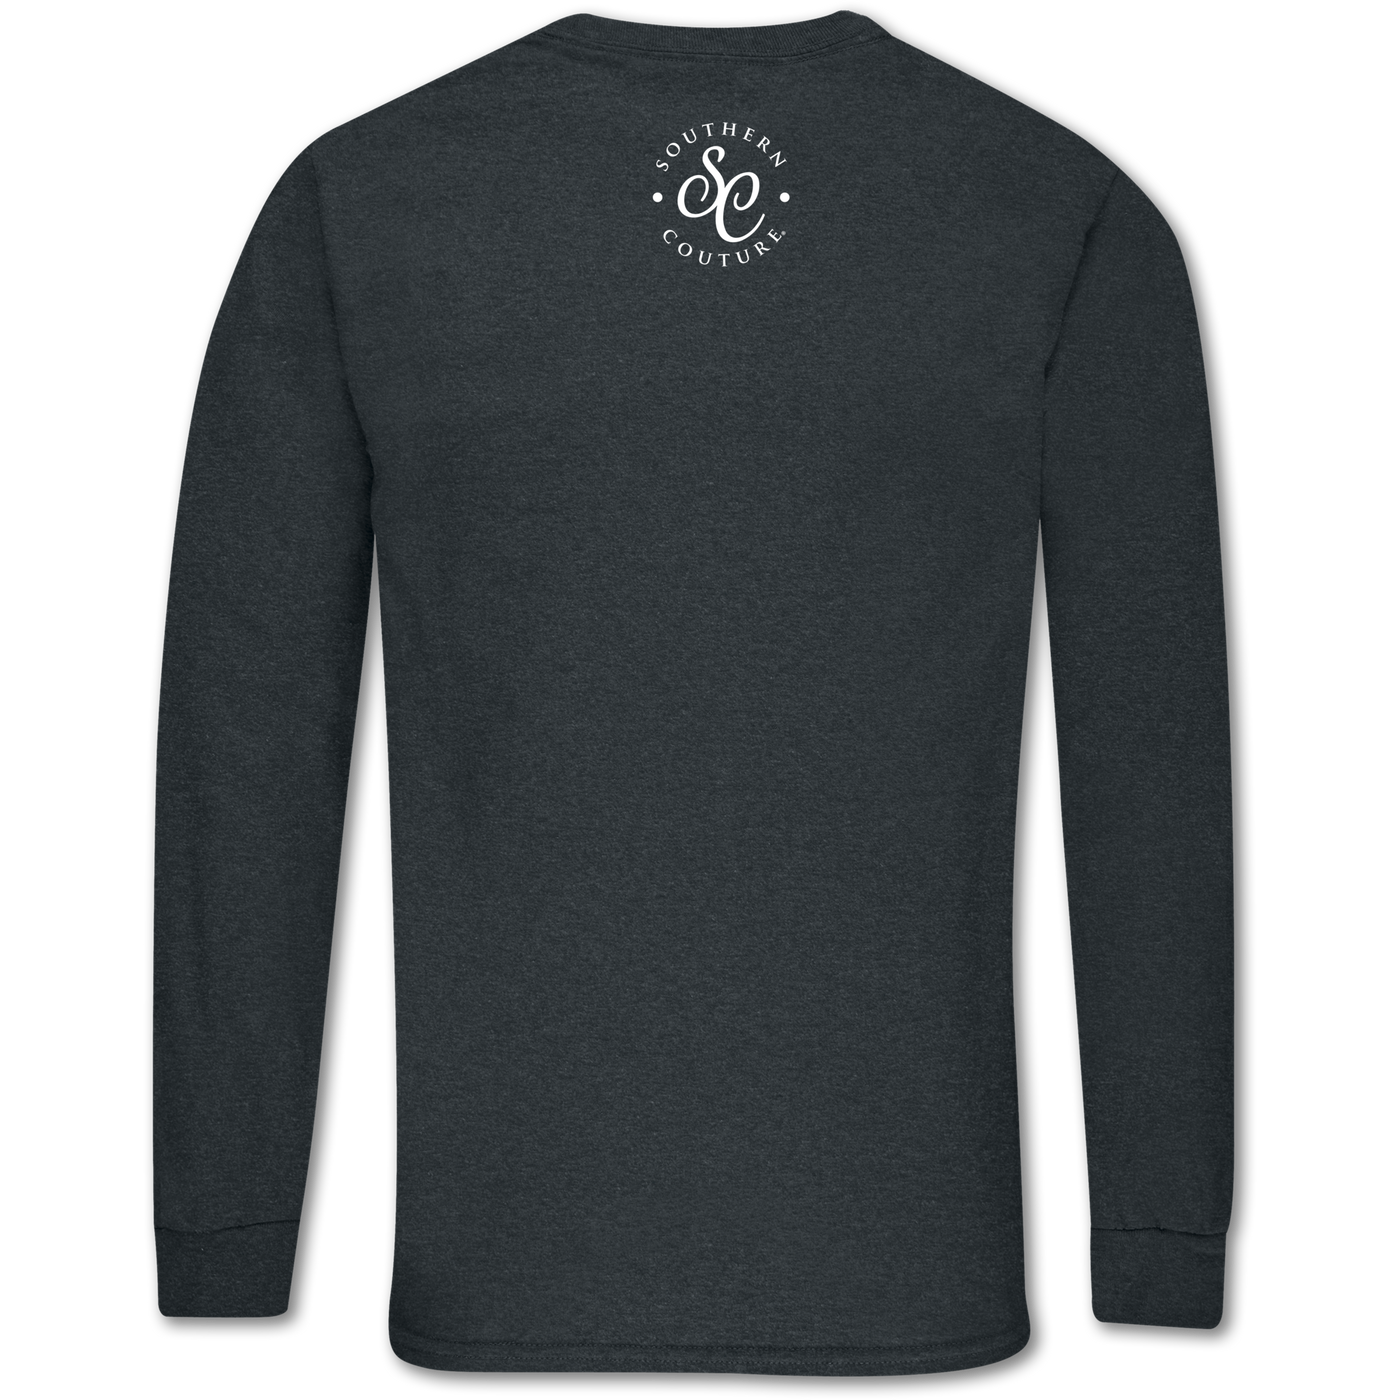 Southern Couture Jingle Bells Dark Heather Long Sleeve